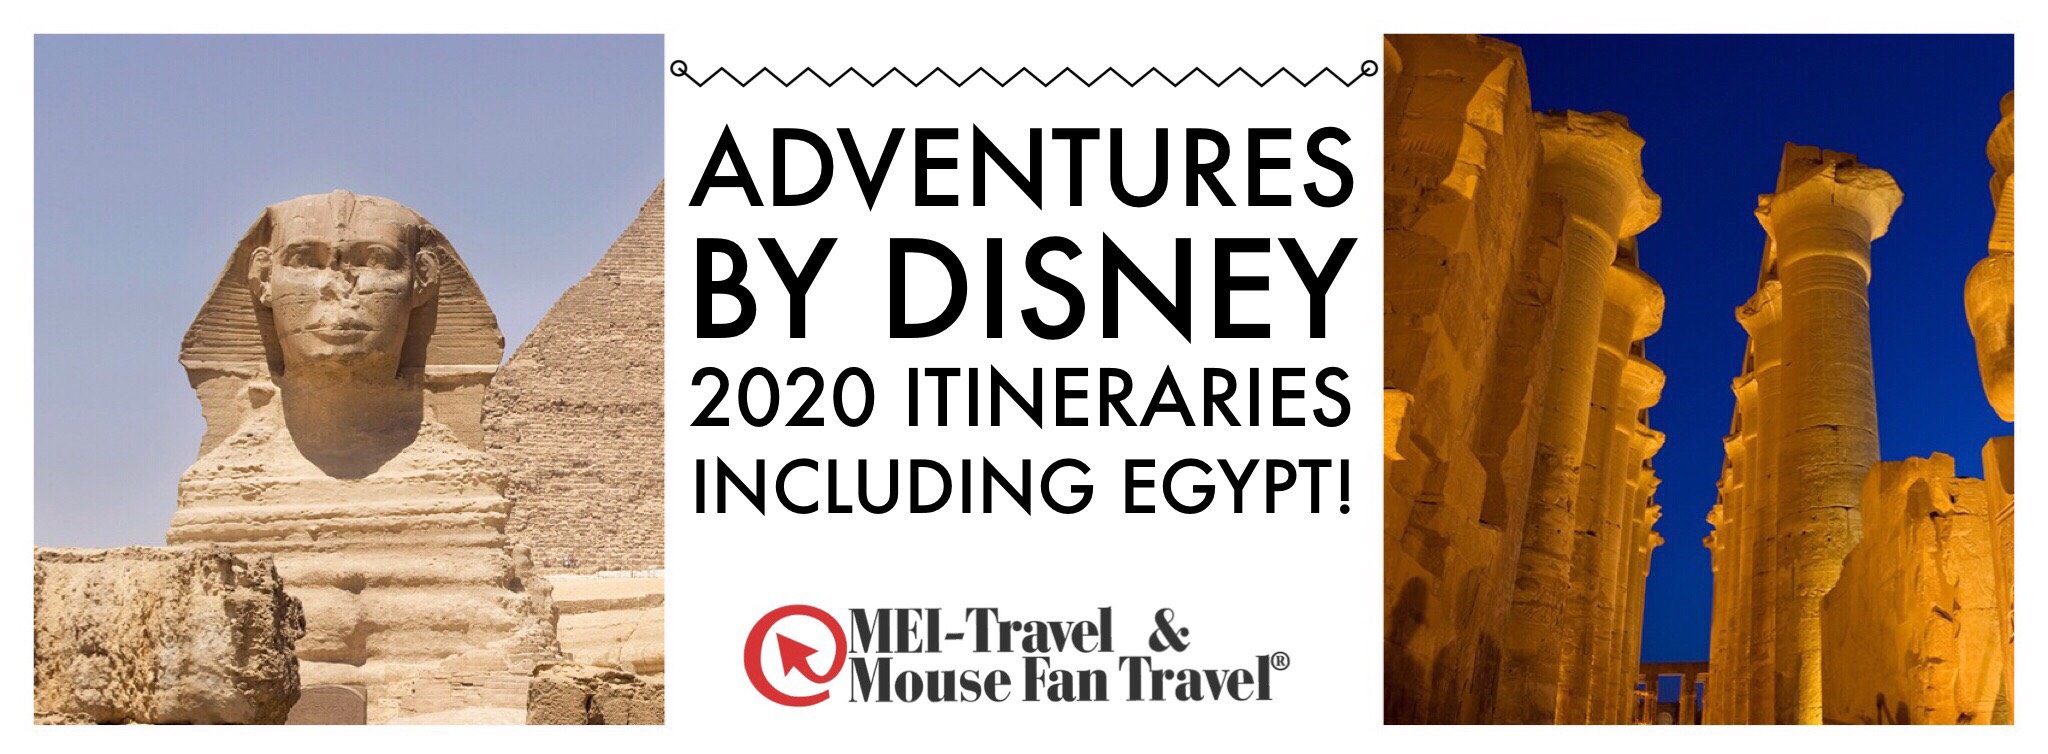 2020 Adventures By Disney Itinerary Updates - Egypt!